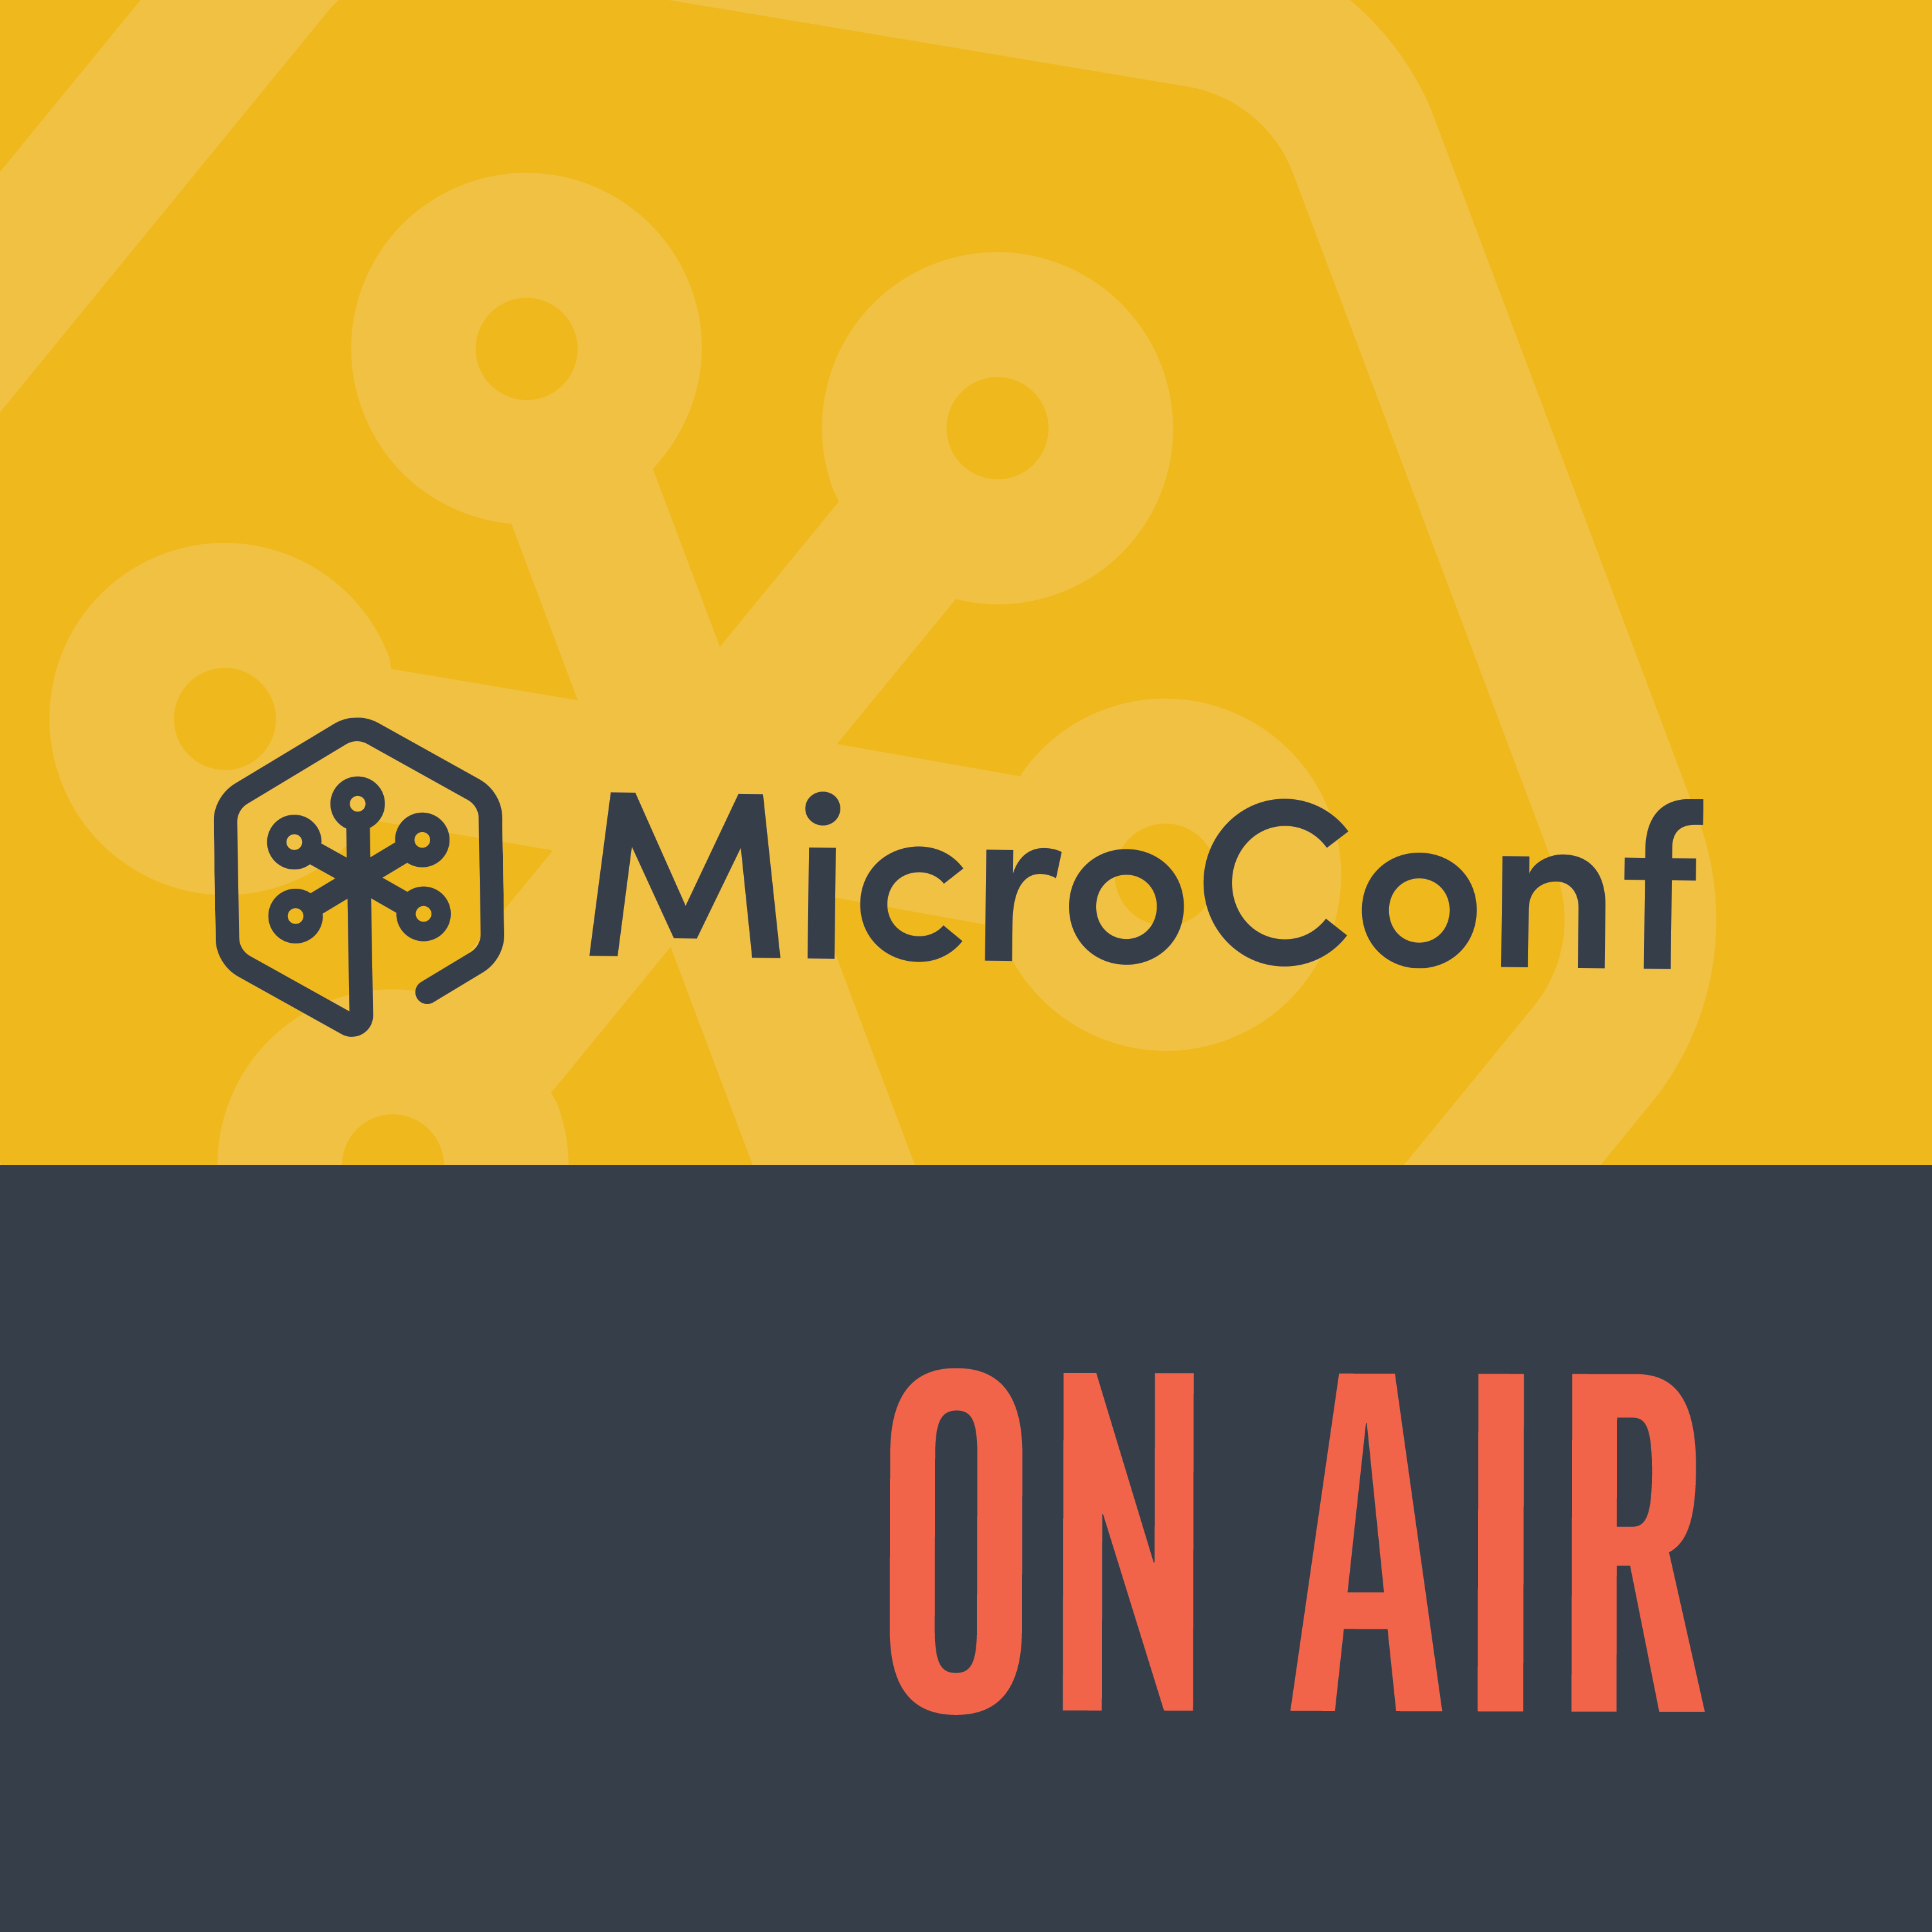 A MicroConf On Air + Software Social Podcast Crossover